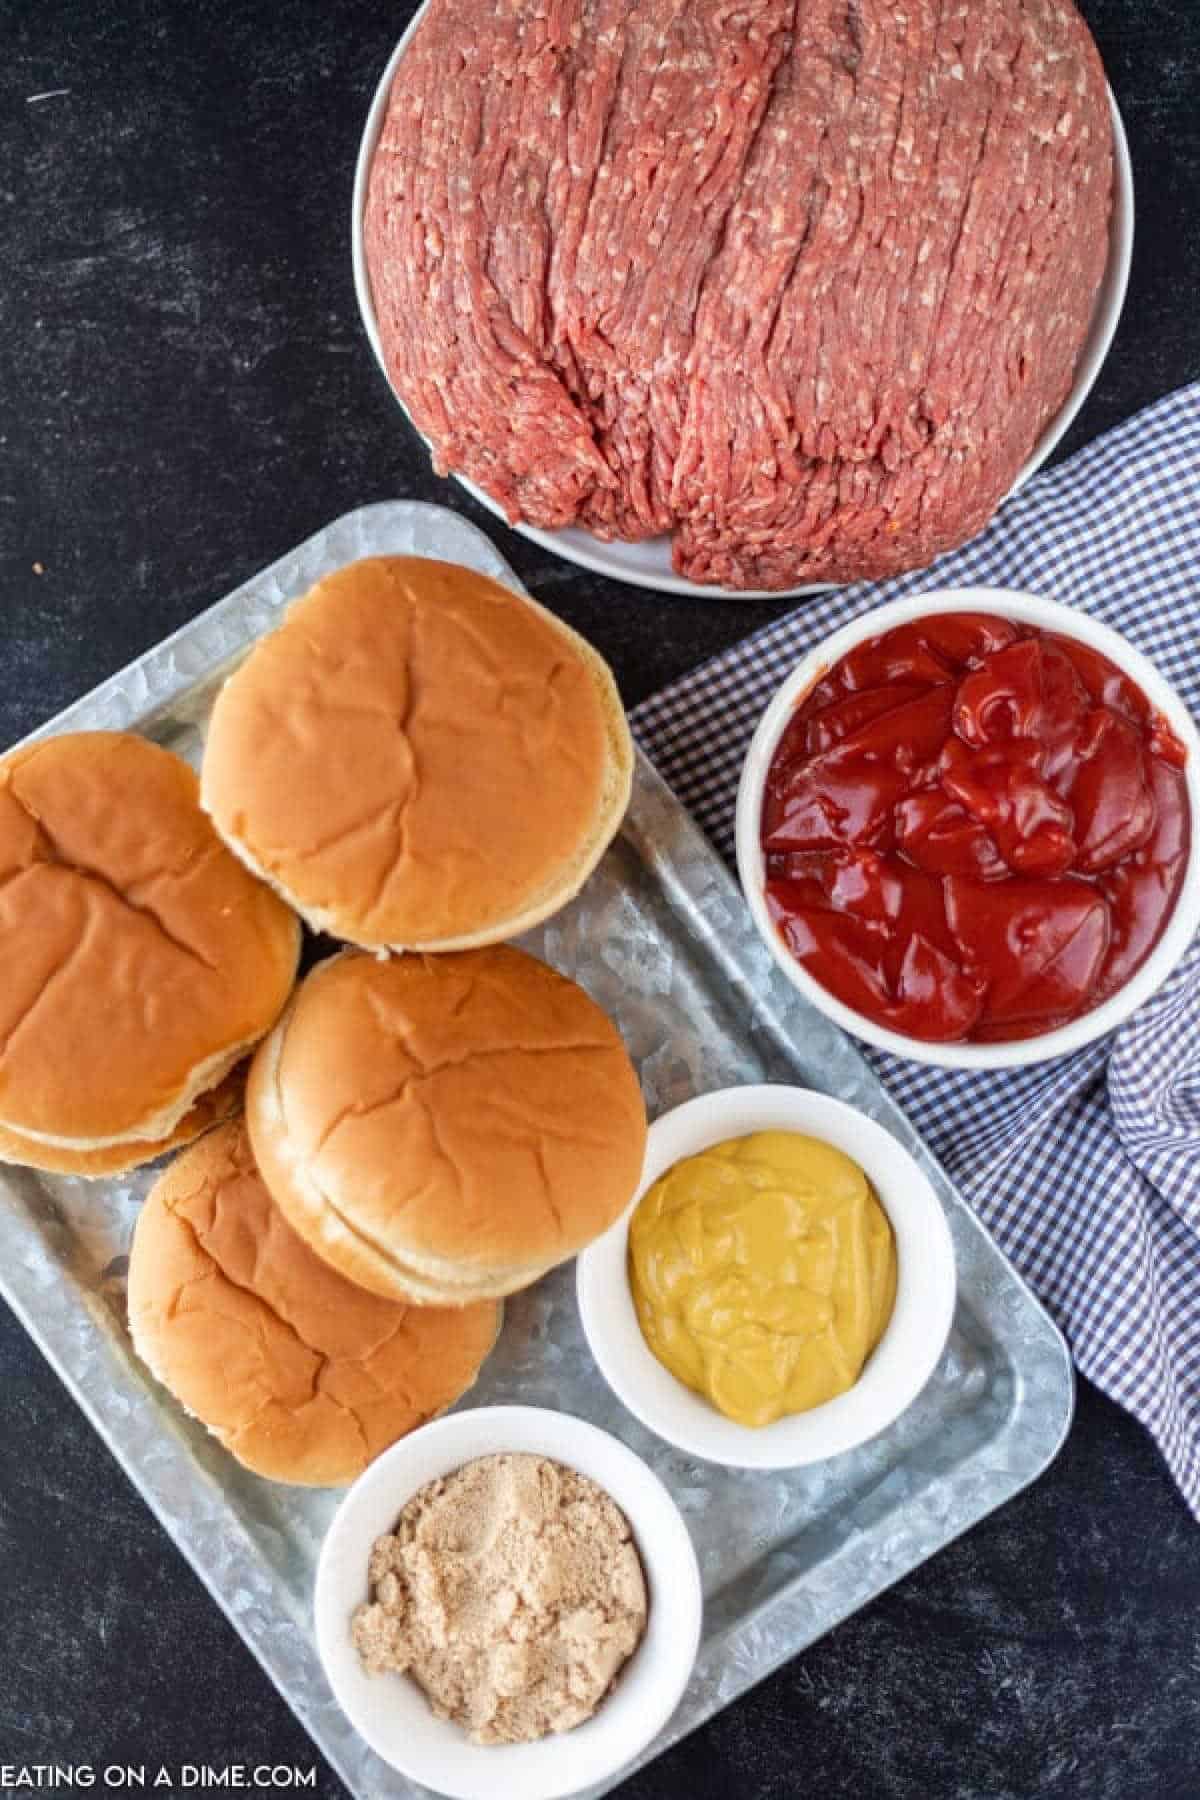 Close up image of ingredients for sloppy joes with hamburger buns on a platter. Yellow mustard, ketchup, brown sugar, ground beef